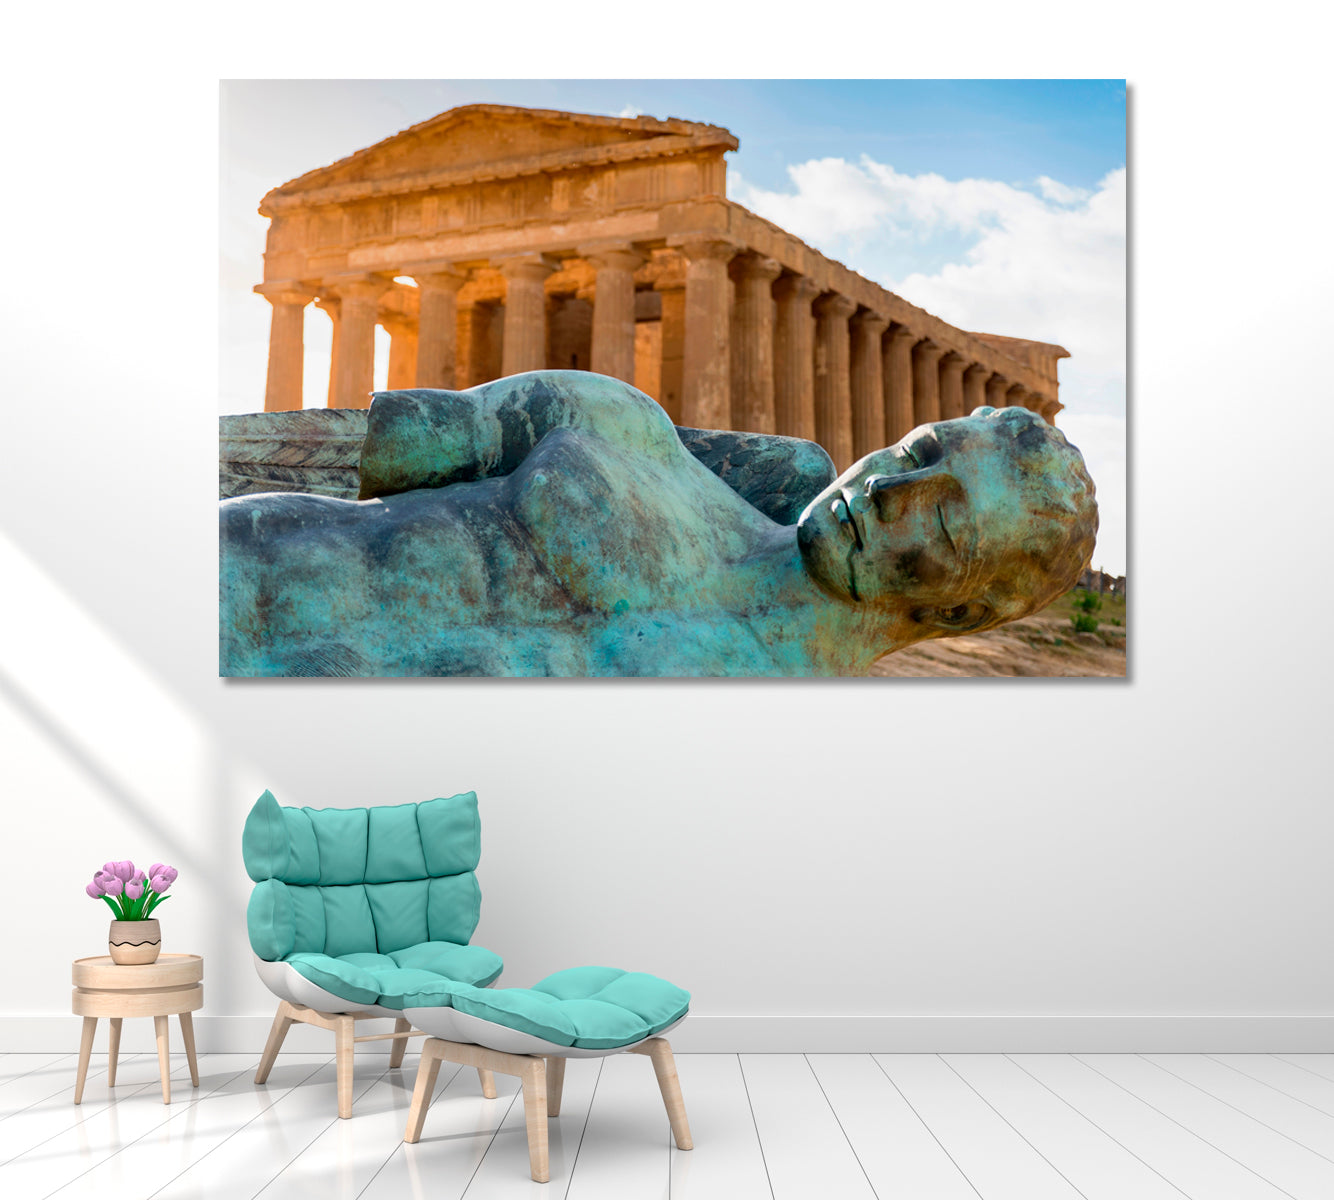 Temple of Concordia Agrigento Italy Canvas Print ArtLexy 1 Panel 24"x16" inches 